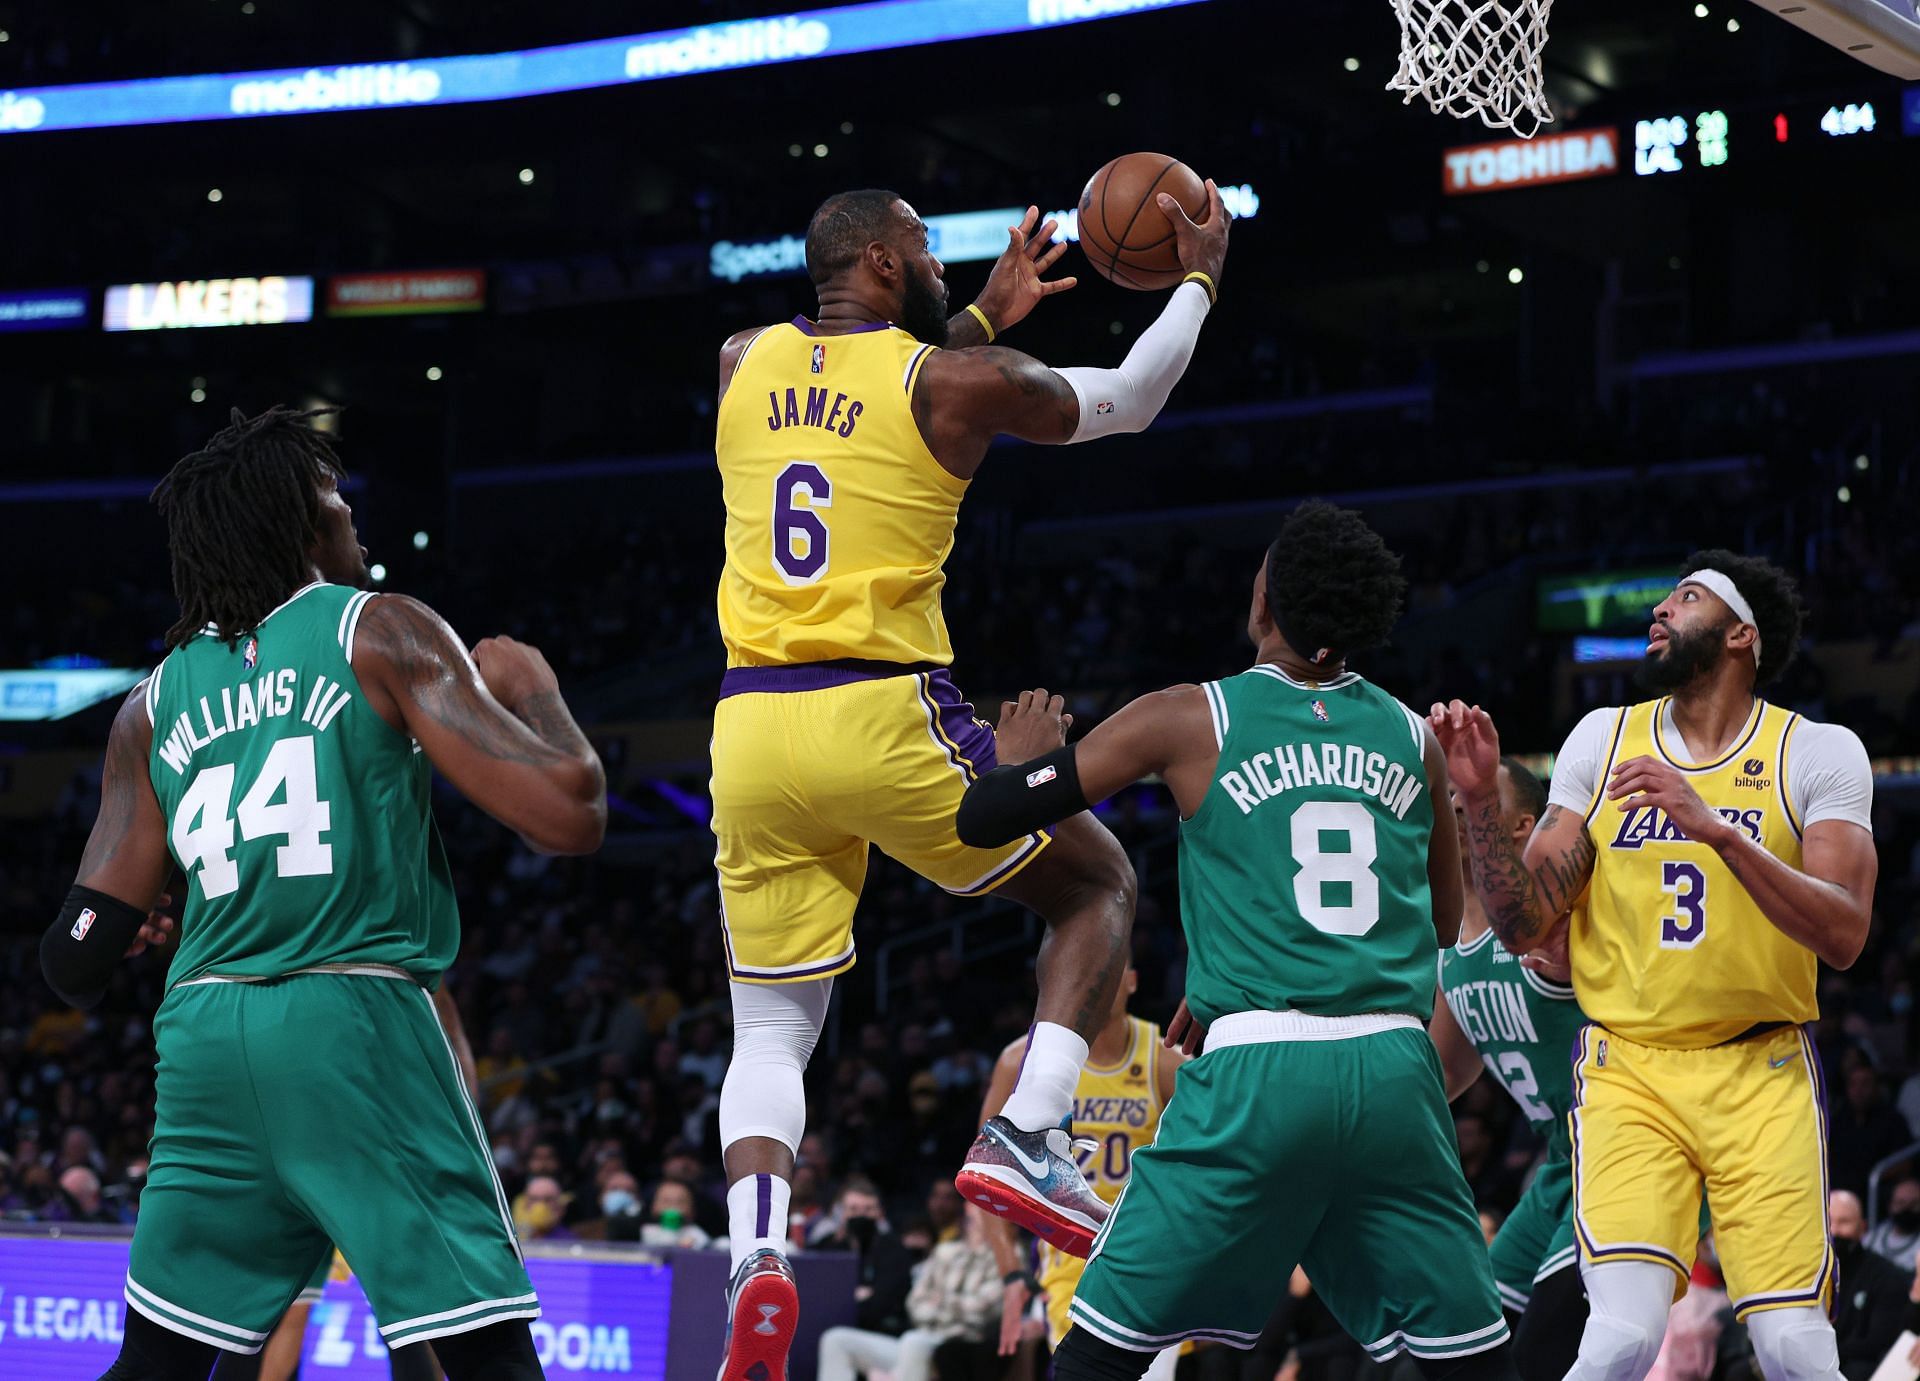 LeBron James #6 of the Los Angeles Lakers scores on a layup in front of Robert Williams III #44 and Josh Richardson #8 of the Boston Celtics